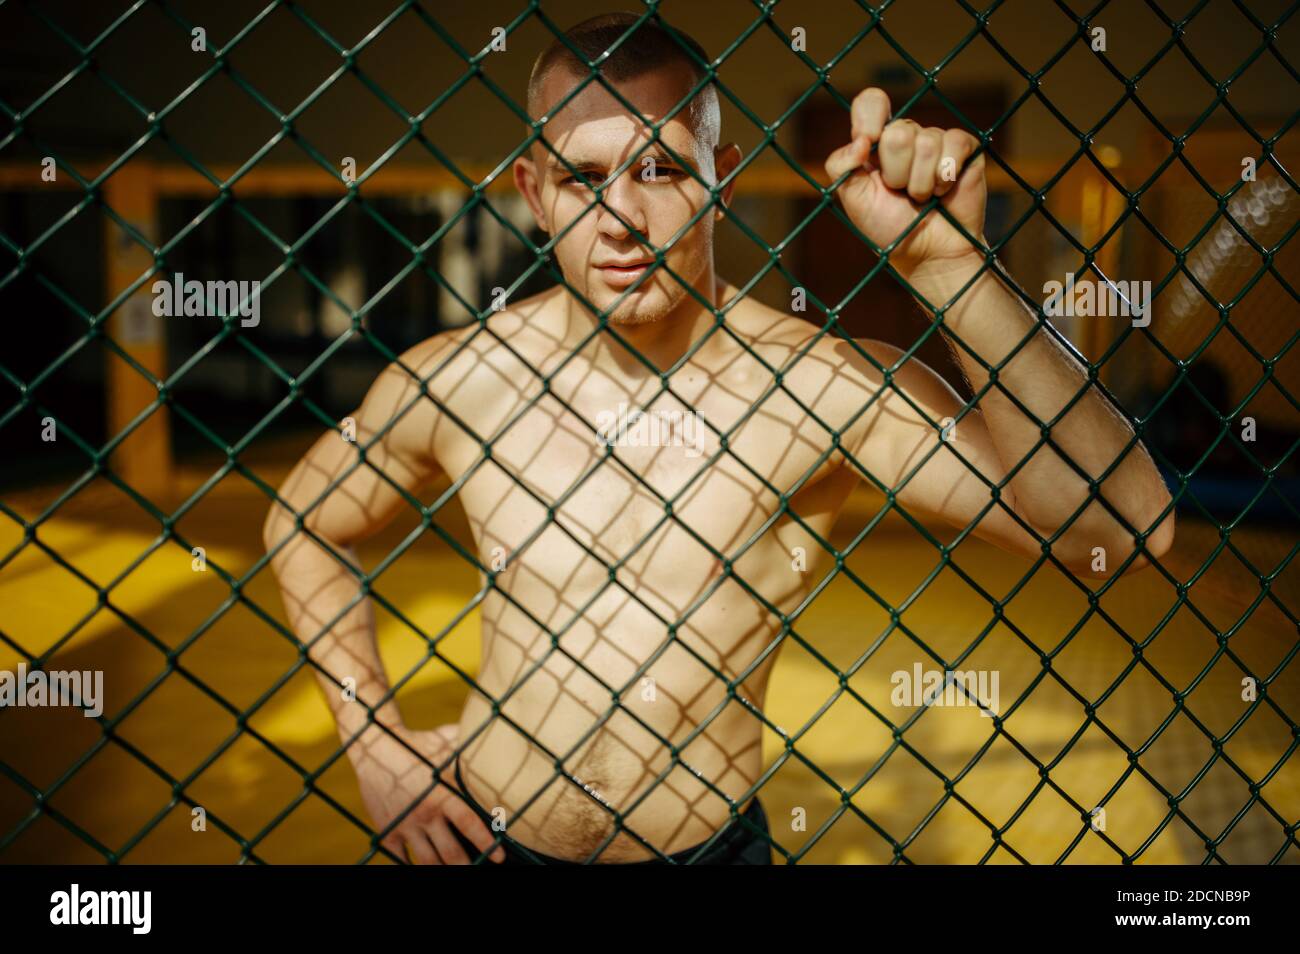 Male MMA fighter standing at the grid in a cage Stock Photo